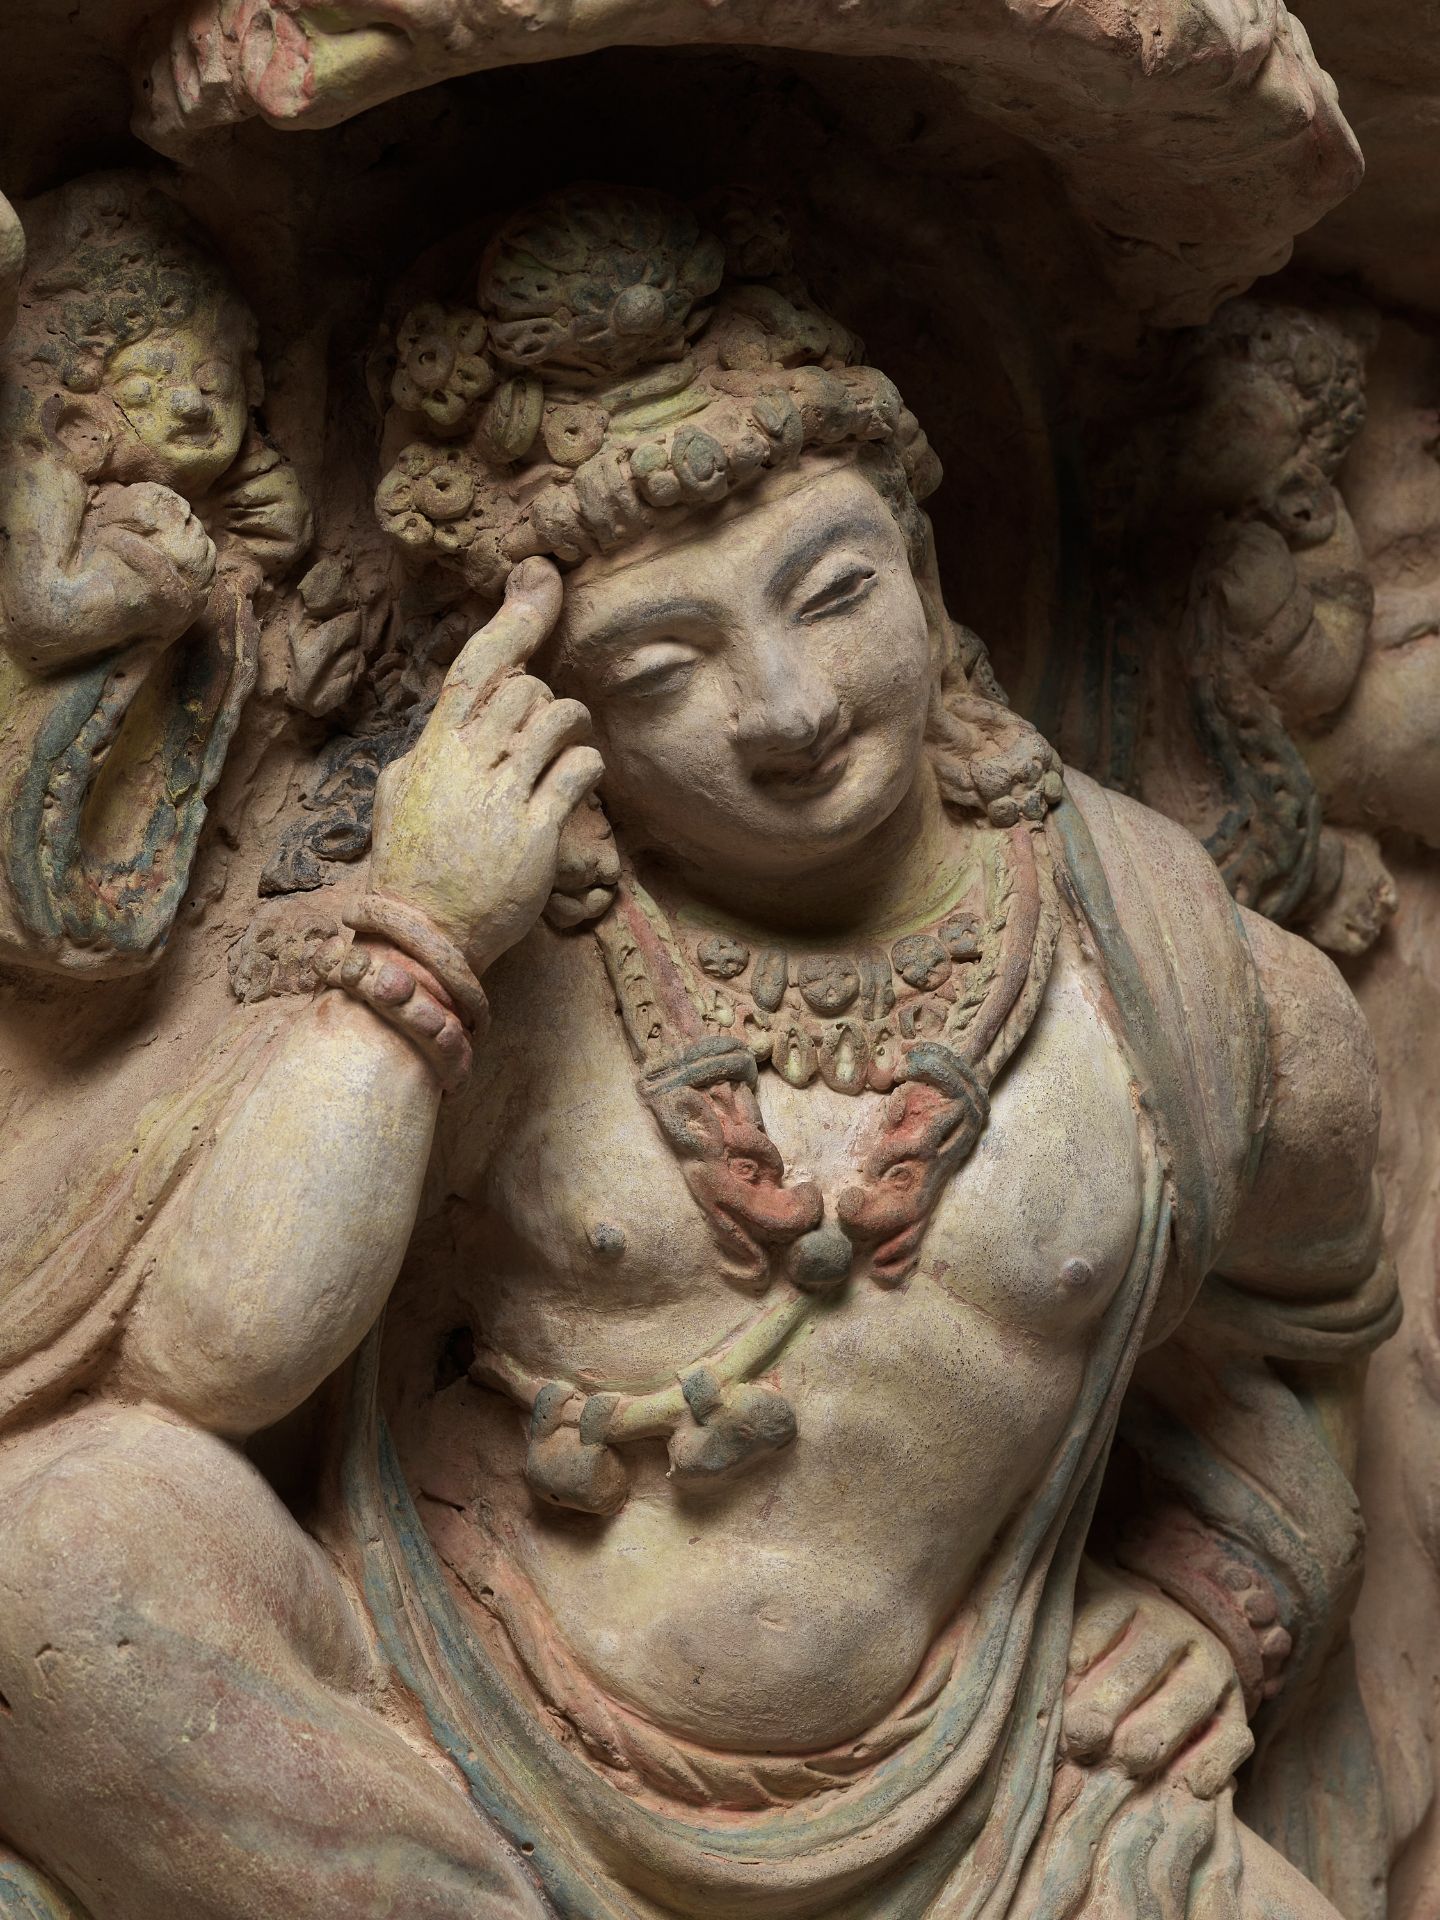 AN EXTRAORDINARILY RARE AND SPECTACULAR TERRACOTTA RELIEF OF A THINKING PRINCE SIDDHARTA UNDER THE B - Image 2 of 19